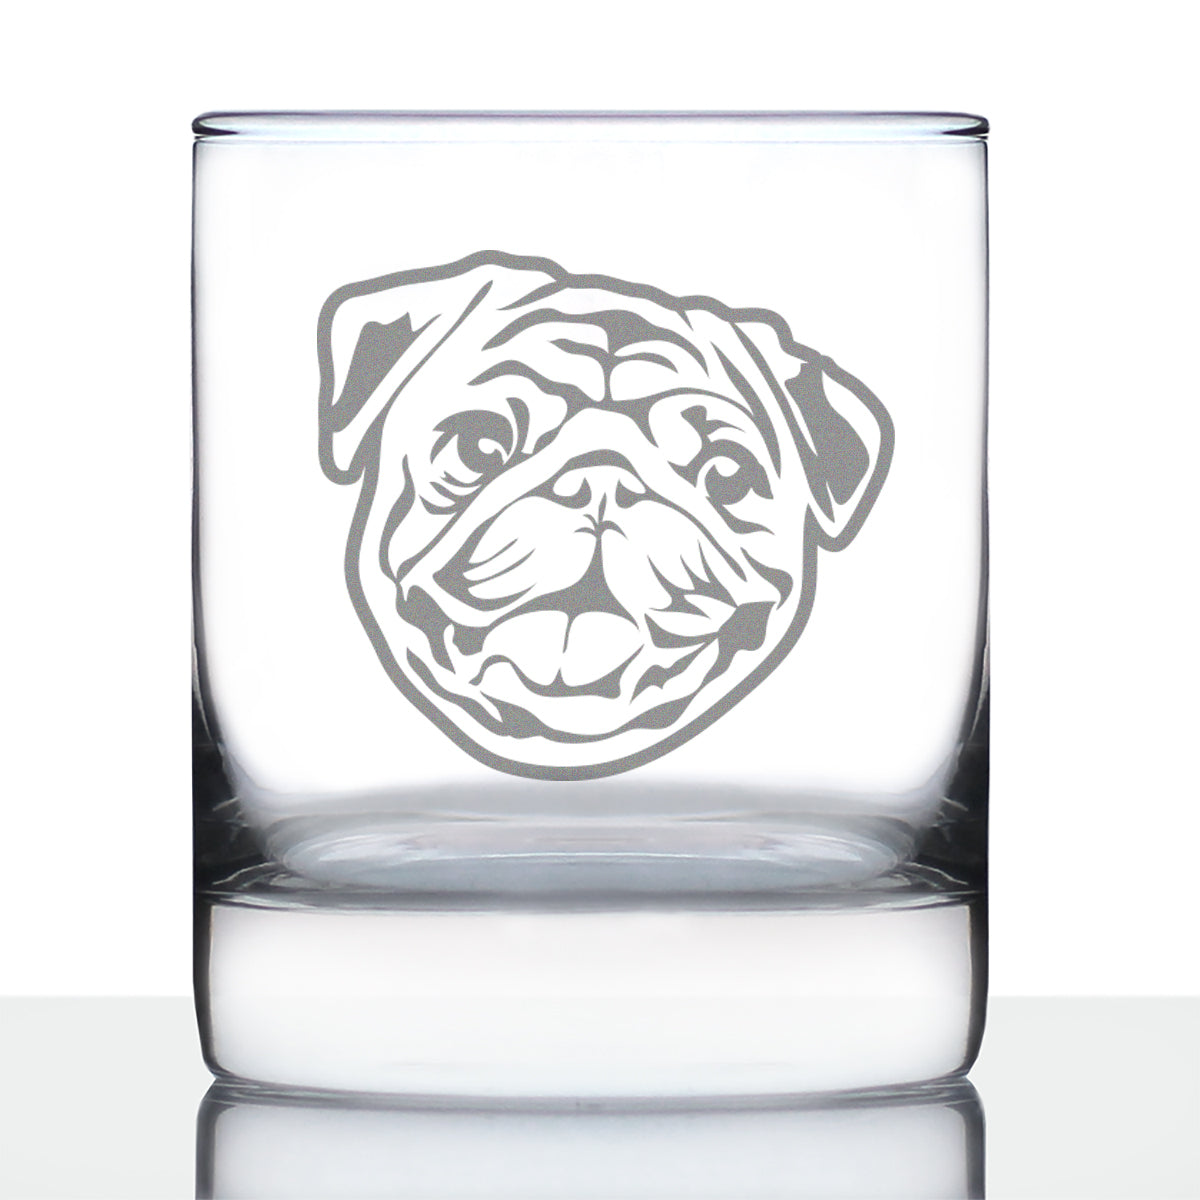 Happy Pug Whiskey Rocks Glass - Fun Dog Themed Decor and Gifts for Moms &amp; Dads of Pugs - 10.25 Oz Glasses